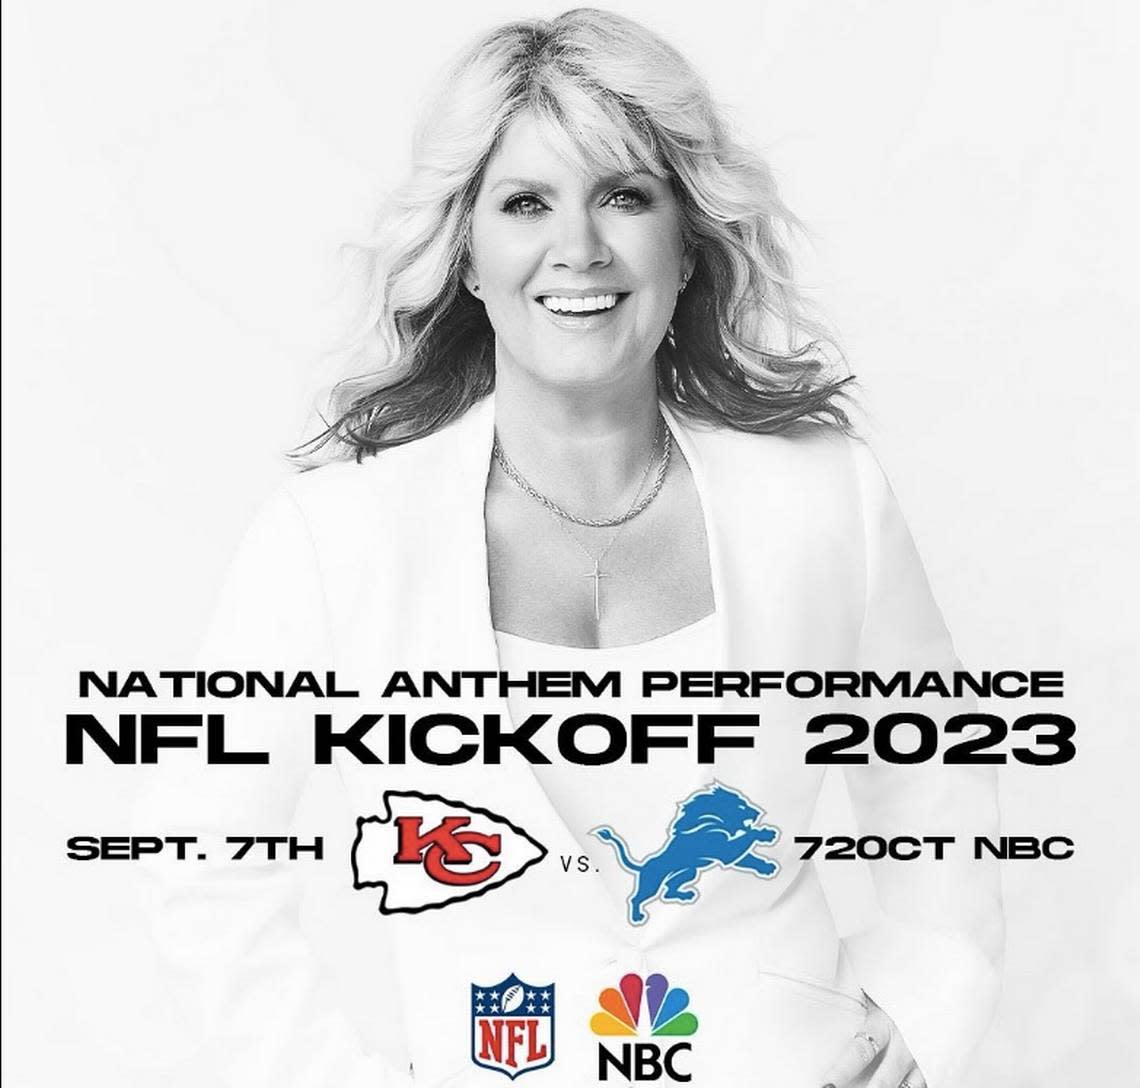 Christian singer Natalie Grant, a nine-time Grammy nominee, has been chosen to sing the national anthem before the Kansas City Chiefs season opener Thursday night. She has sung in Arrowhead once before.